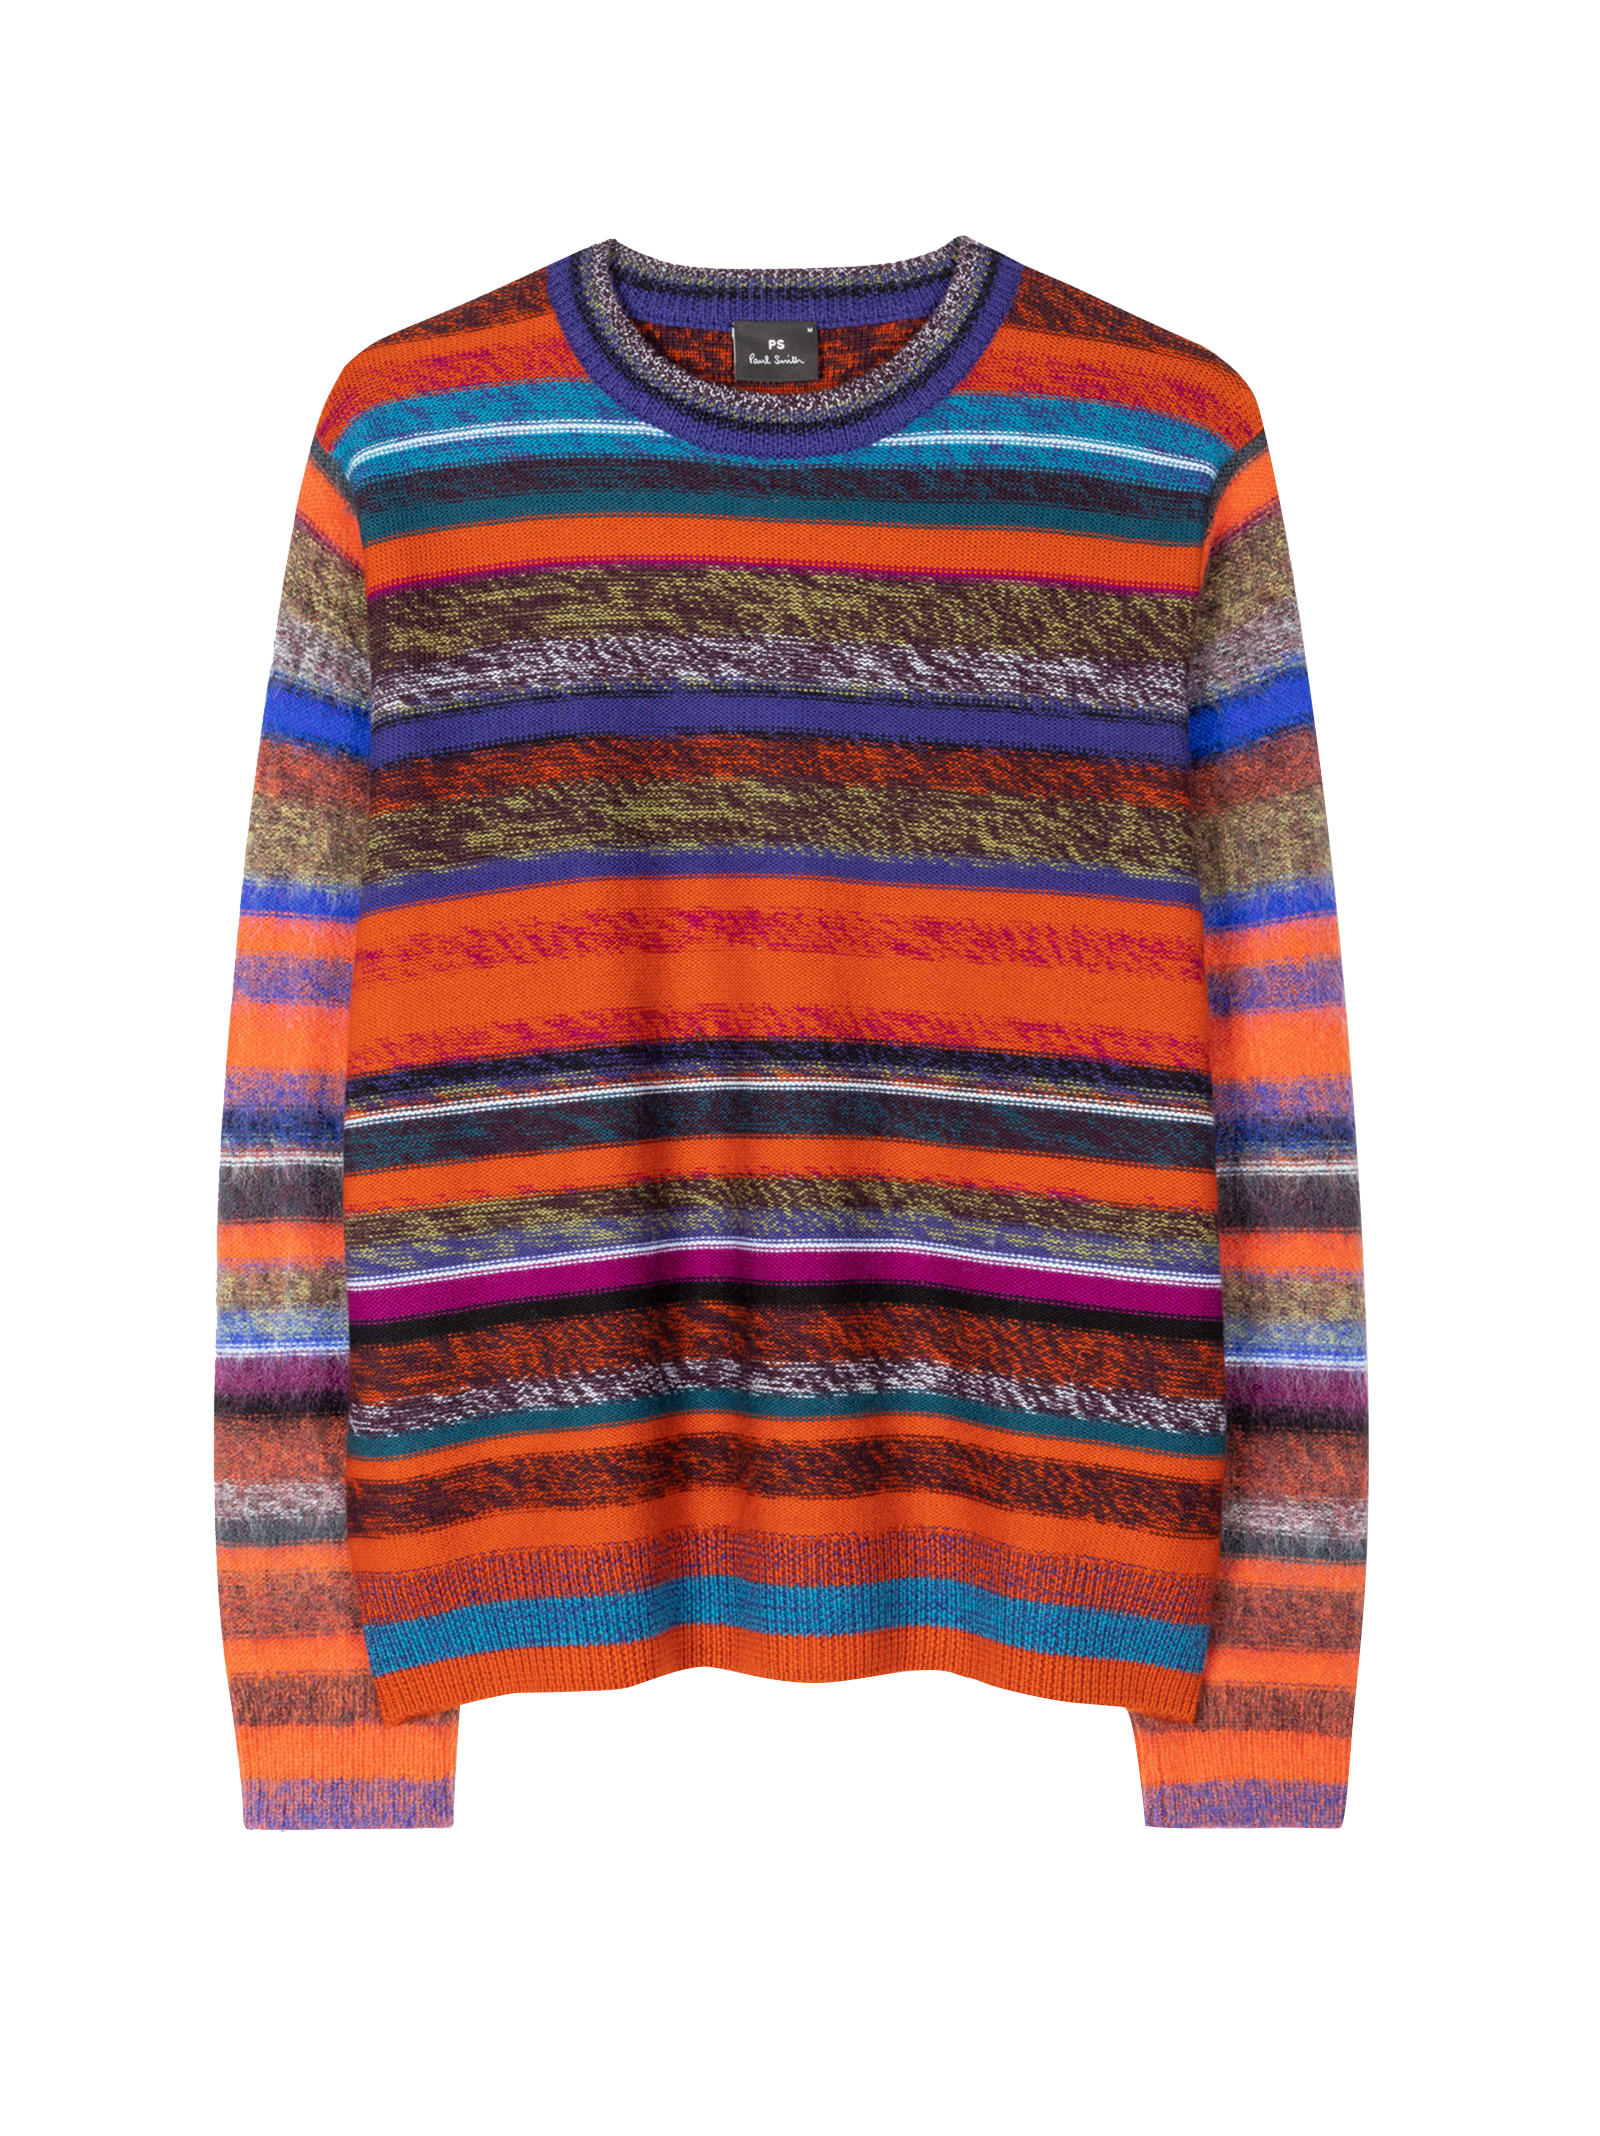 Paul Smith Painted Stripe Sweater